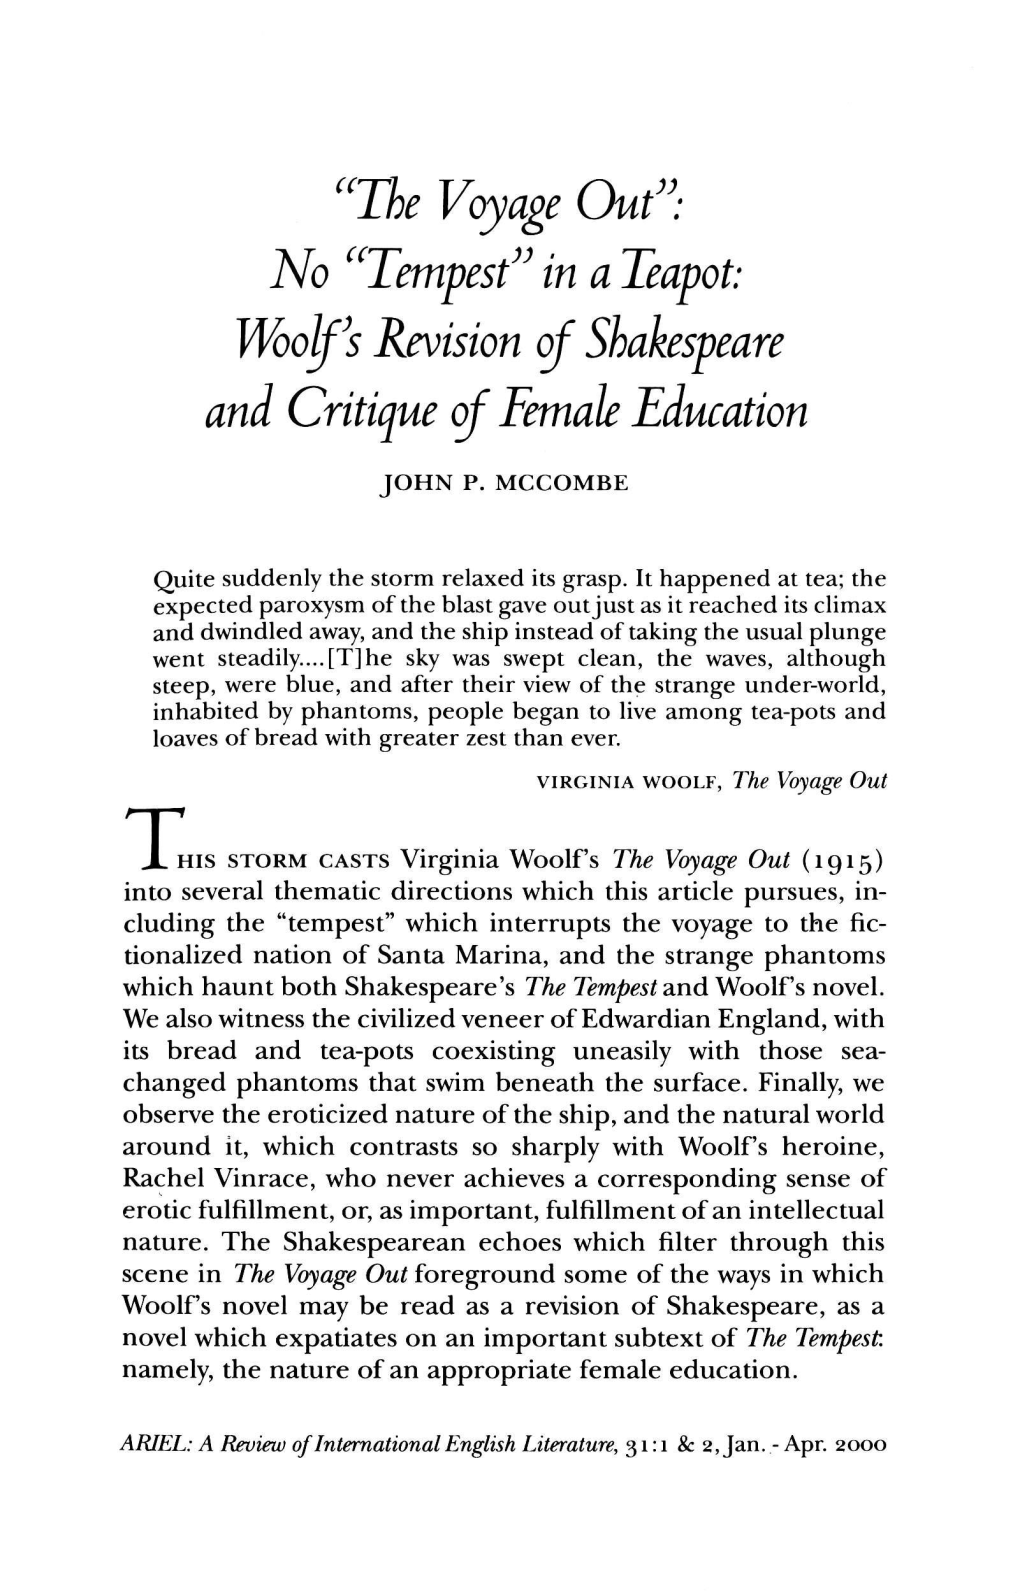 The Voyage Out": No "Tempest" in a Teapot: Woolfs Revision of Shakespeare and Critique of Temale Education